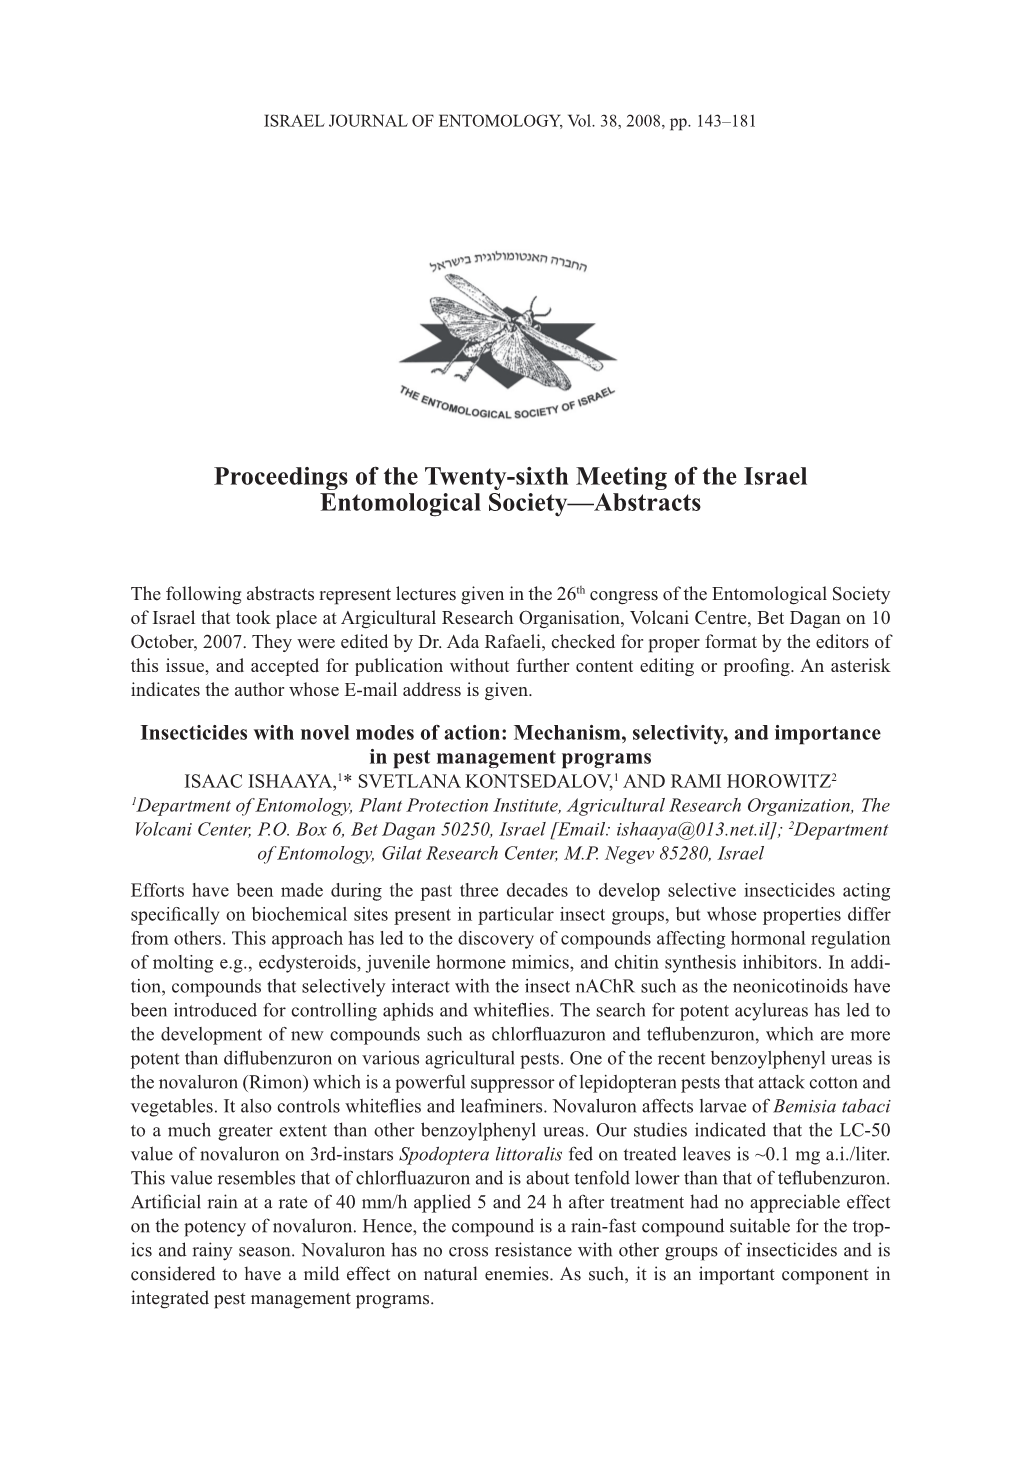 Proceedings of the Twenty-Sixth Meeting of the Israel Entomological Society—Abstracts